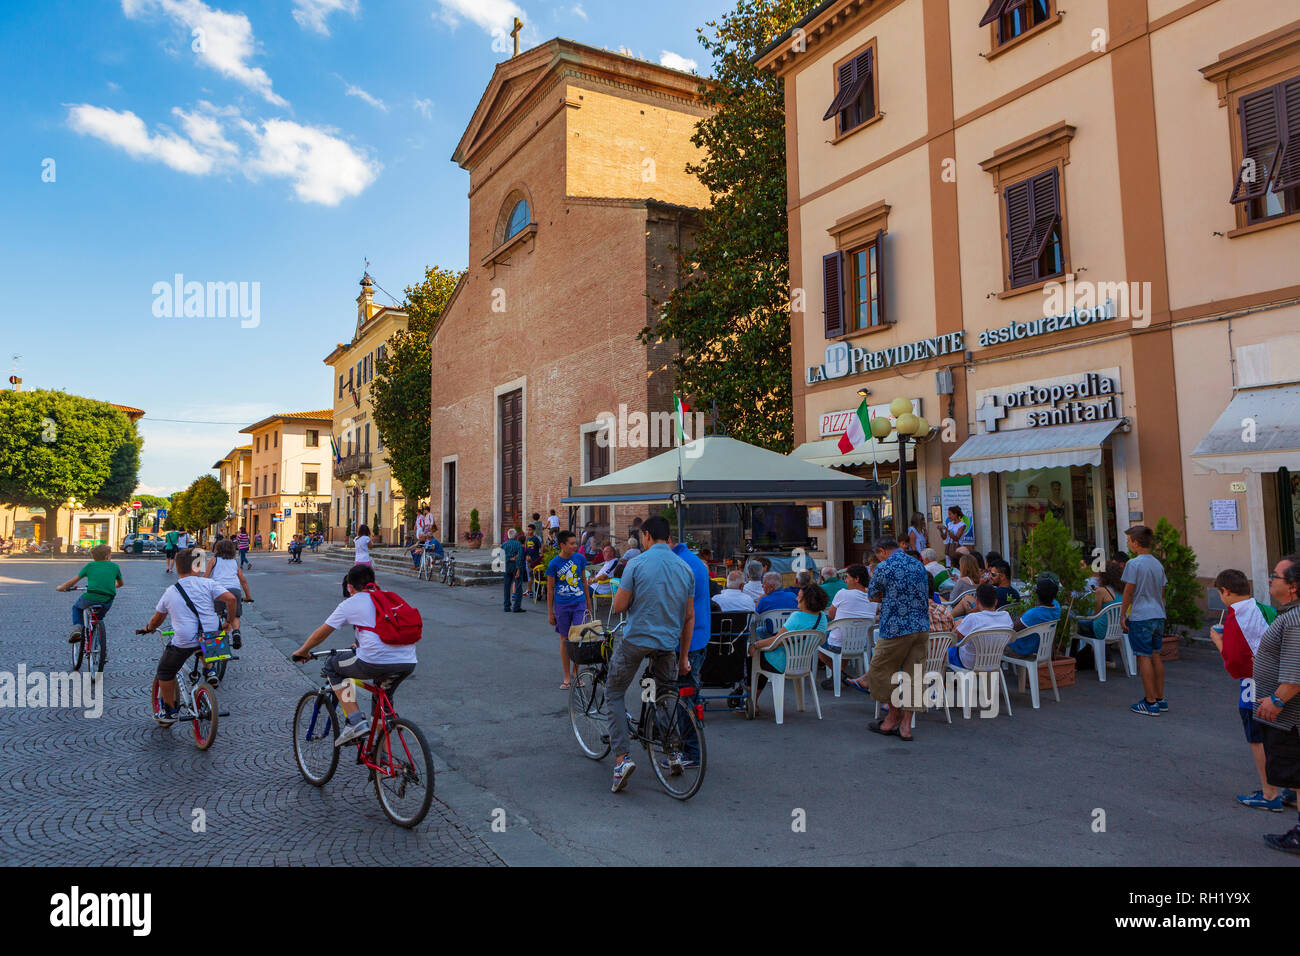 People of Certaldo, a town and commune of Tuscany, Italy, watch the 2014 FIFA World Cup. Stock Photo